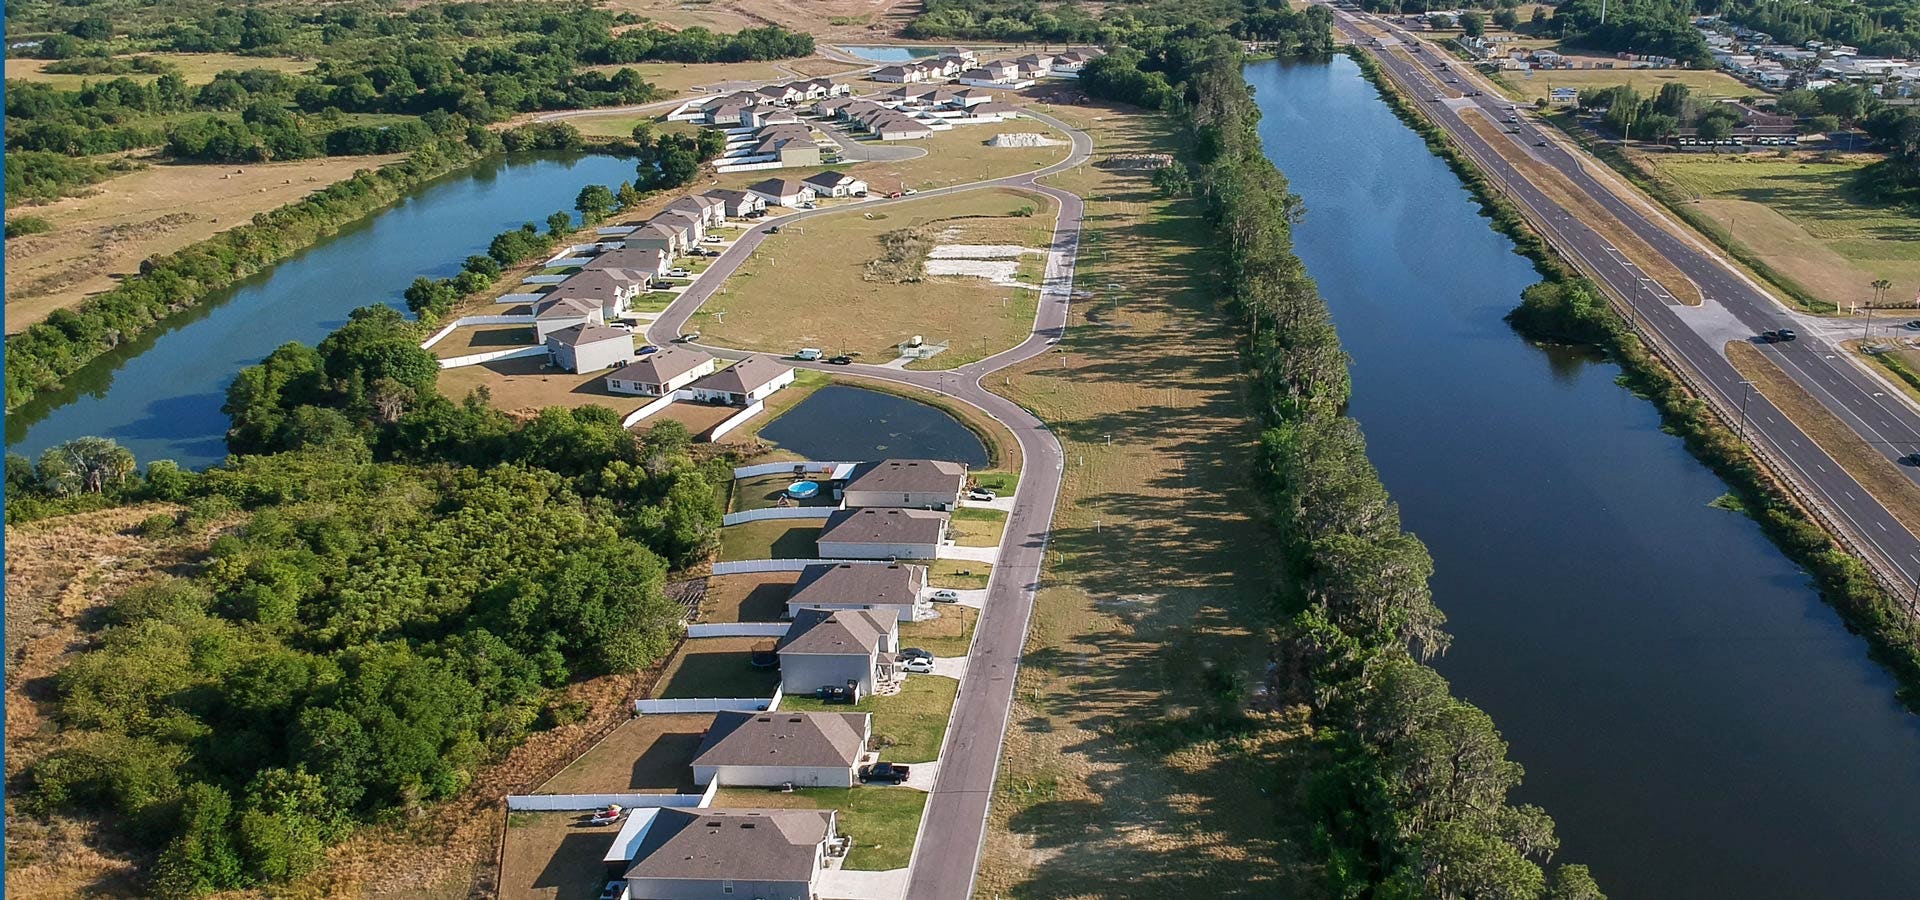 Aerial view of Bridgeport Lakes in Mulberry, FL